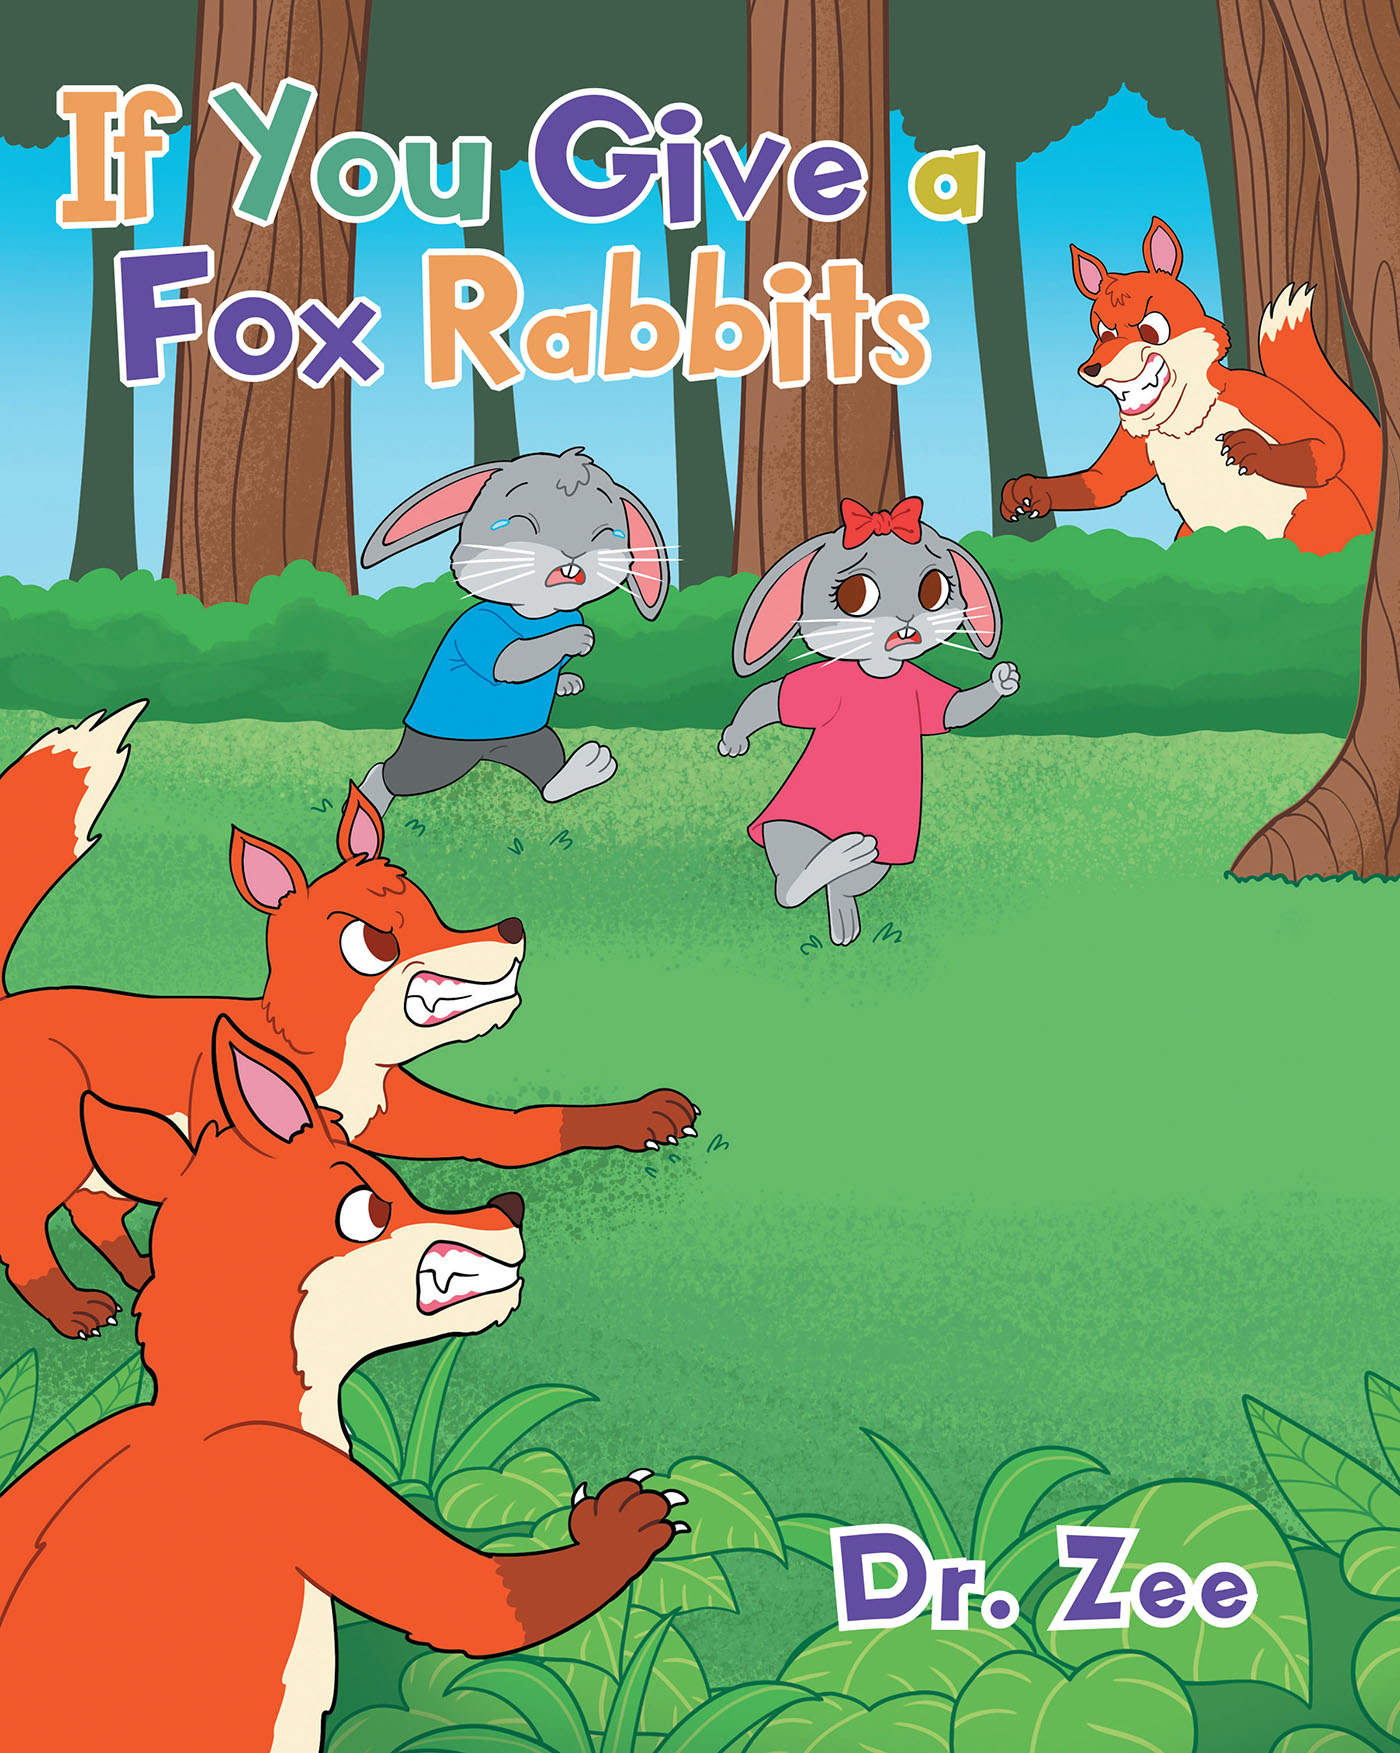 Author Dr. Zee’s New Book, "If You Give a Fox Rabbits," Follows a Pair of Rabbits Who Come to Regret Their Decision to Venture Off Away from Their Parents to Play